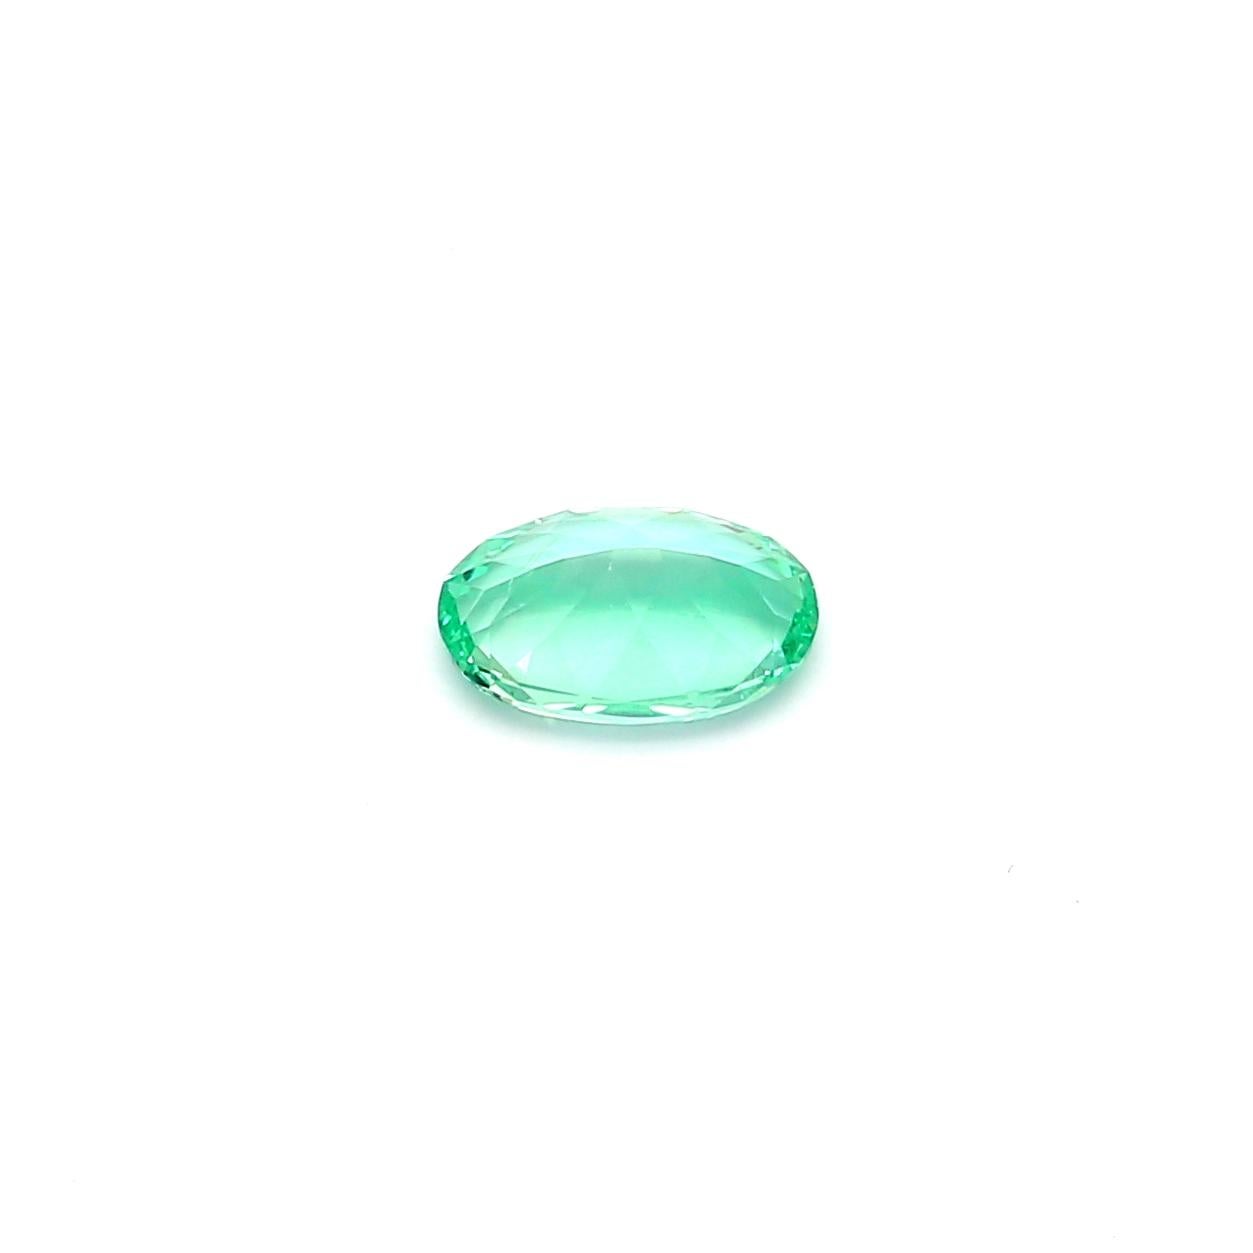 Emeralds from the Russian Origin in the Ural Mountains are very famous because of their extraordinary clarity and neon green tint. 

This exceptional quality oval cut Emerald would make a custom-made jewelry design. Perfect for a Ring or